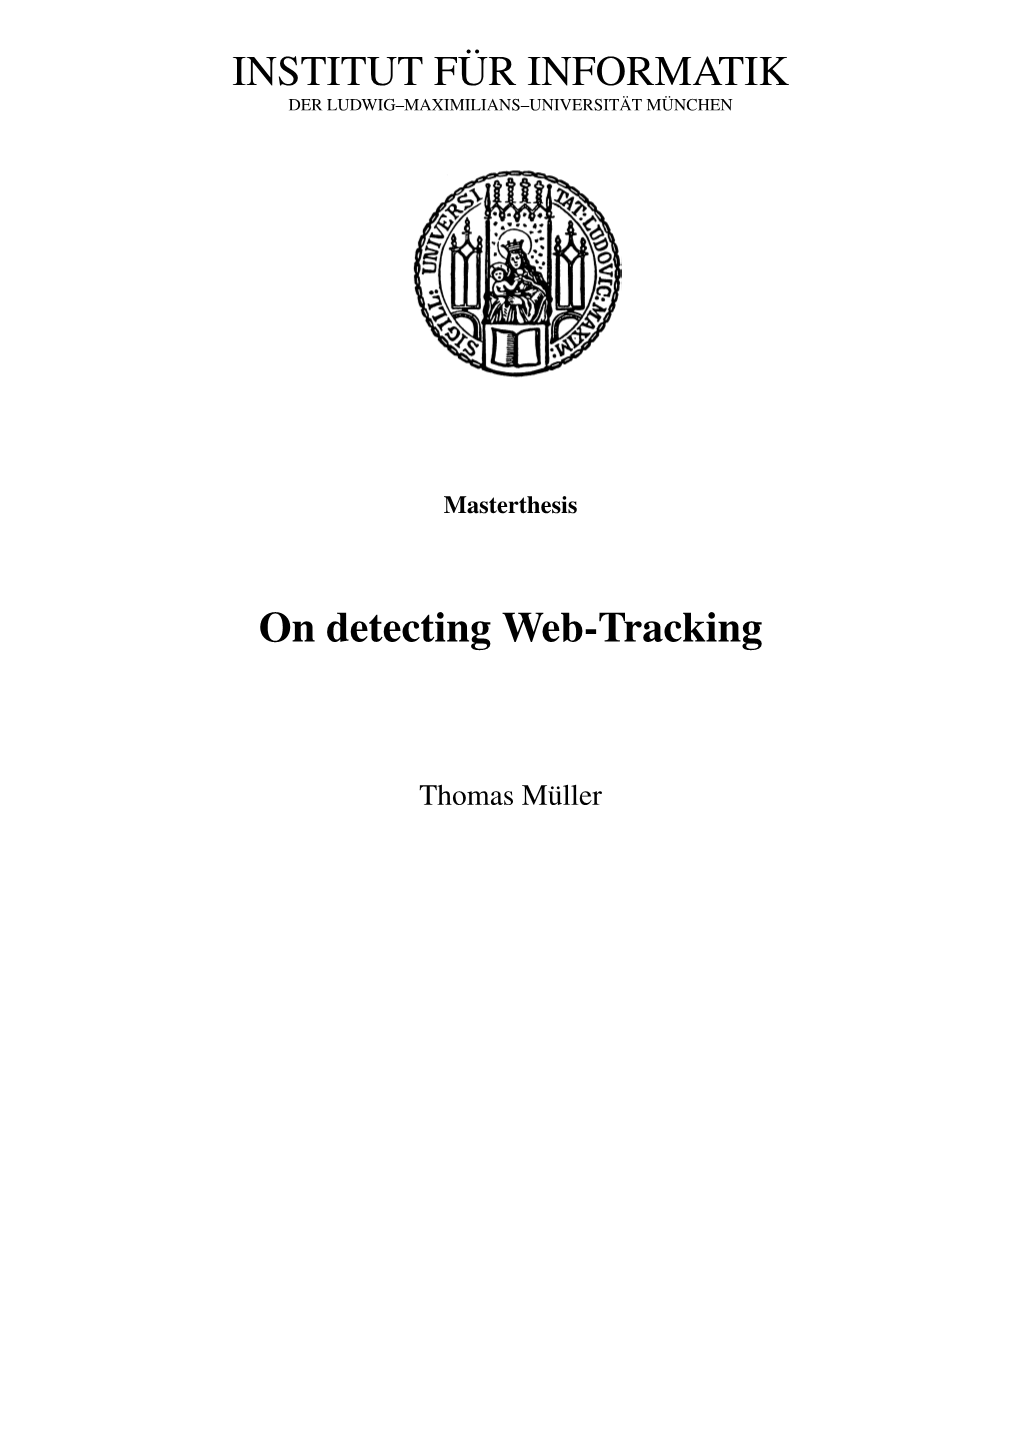 On Detecting Web-Tracking